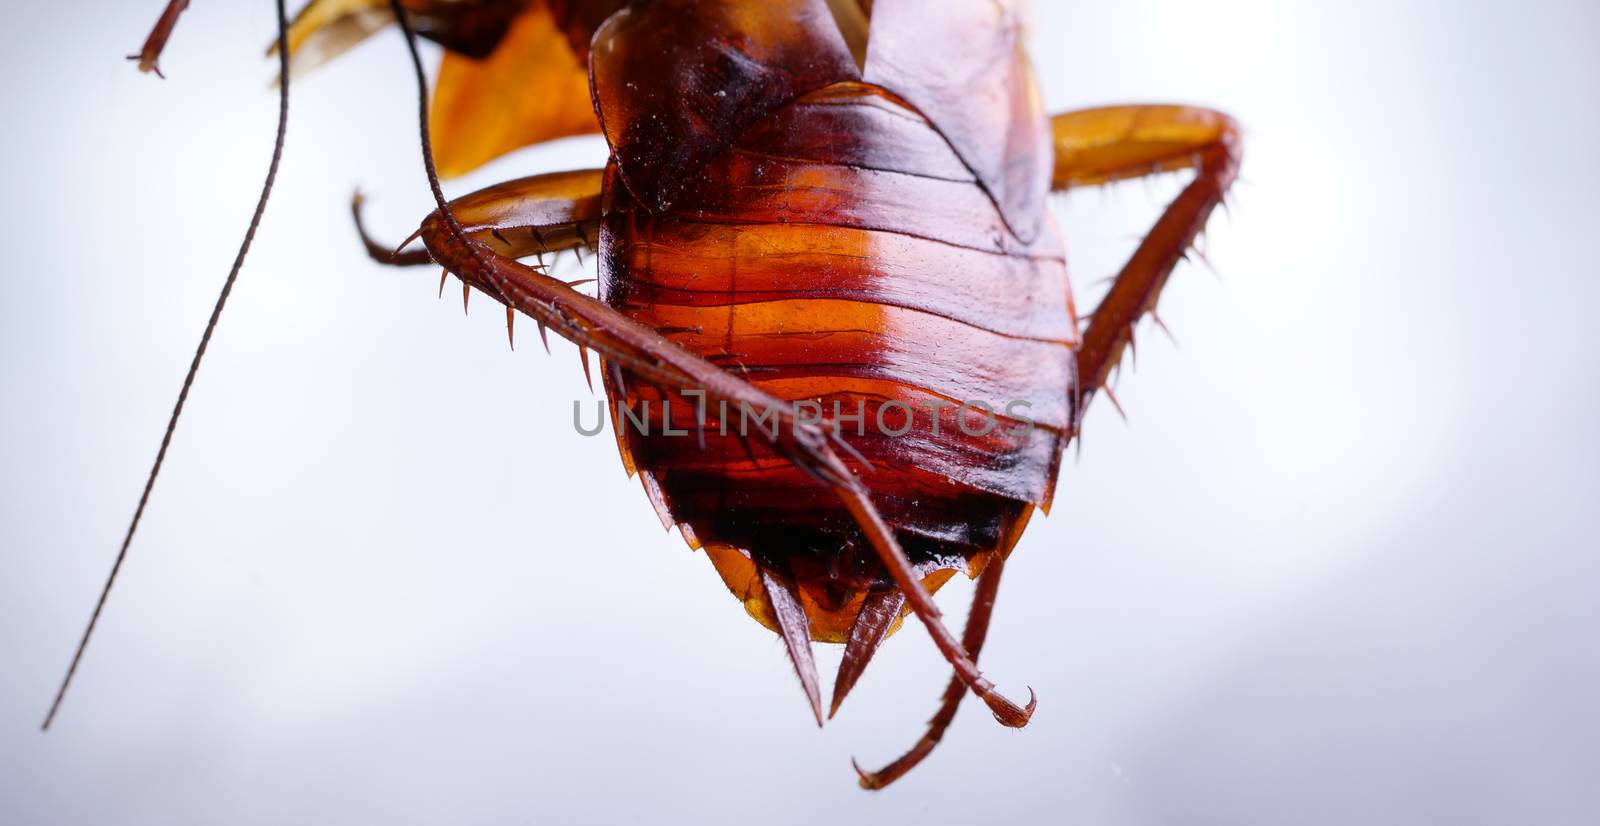 Macro shot of Skin changing stage of a cockroach